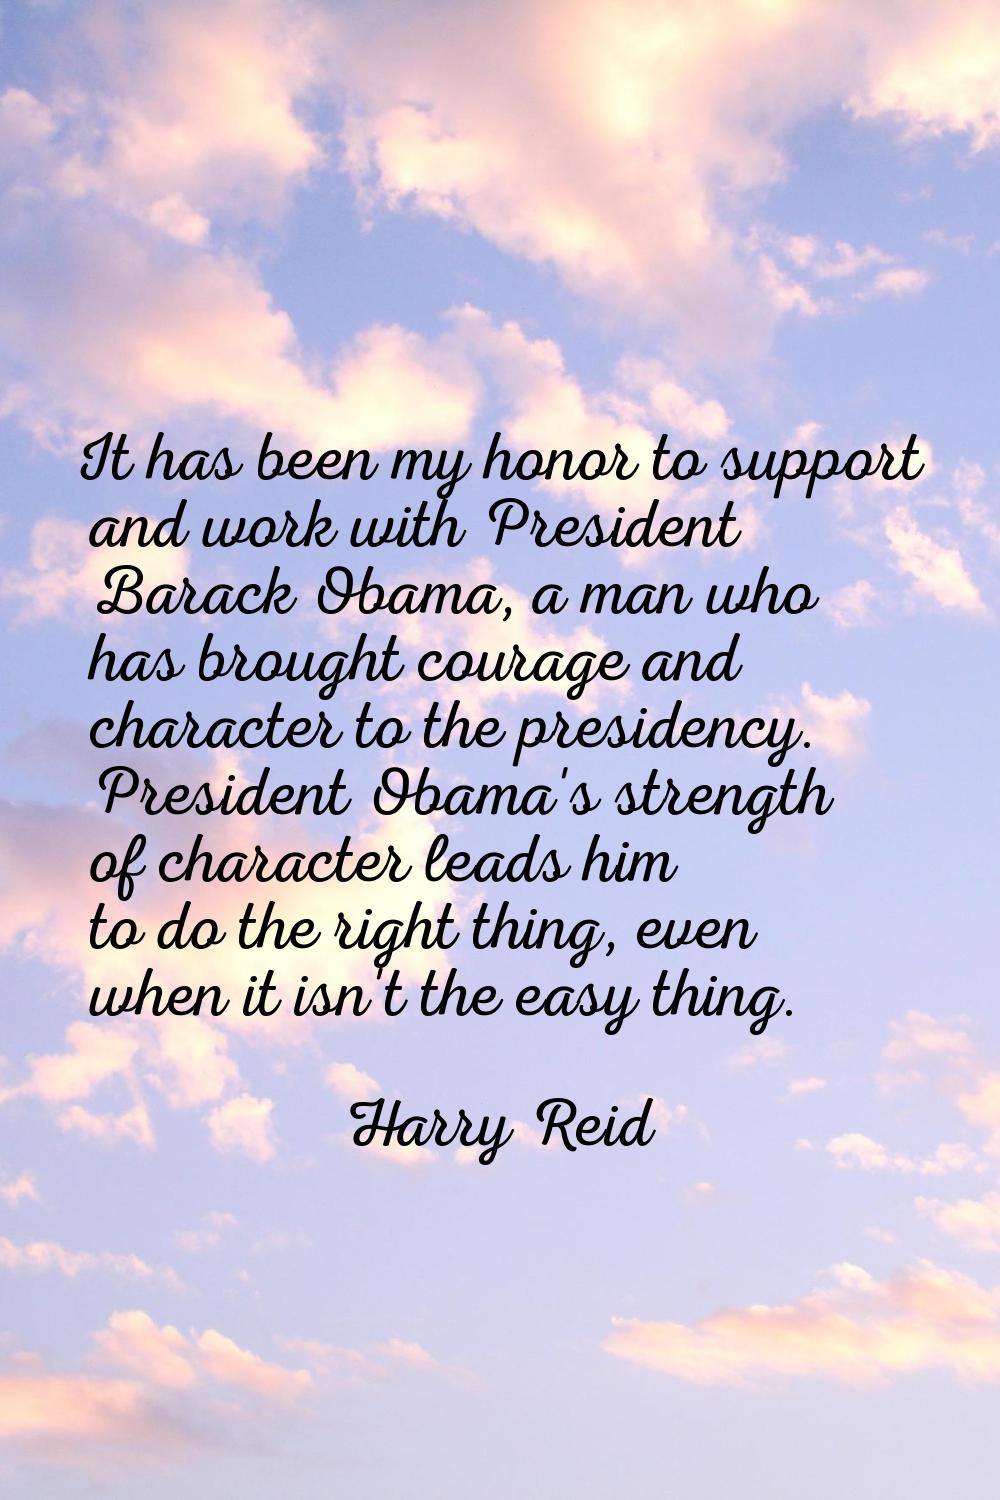 It has been my honor to support and work with President Barack Obama, a man who has brought courage